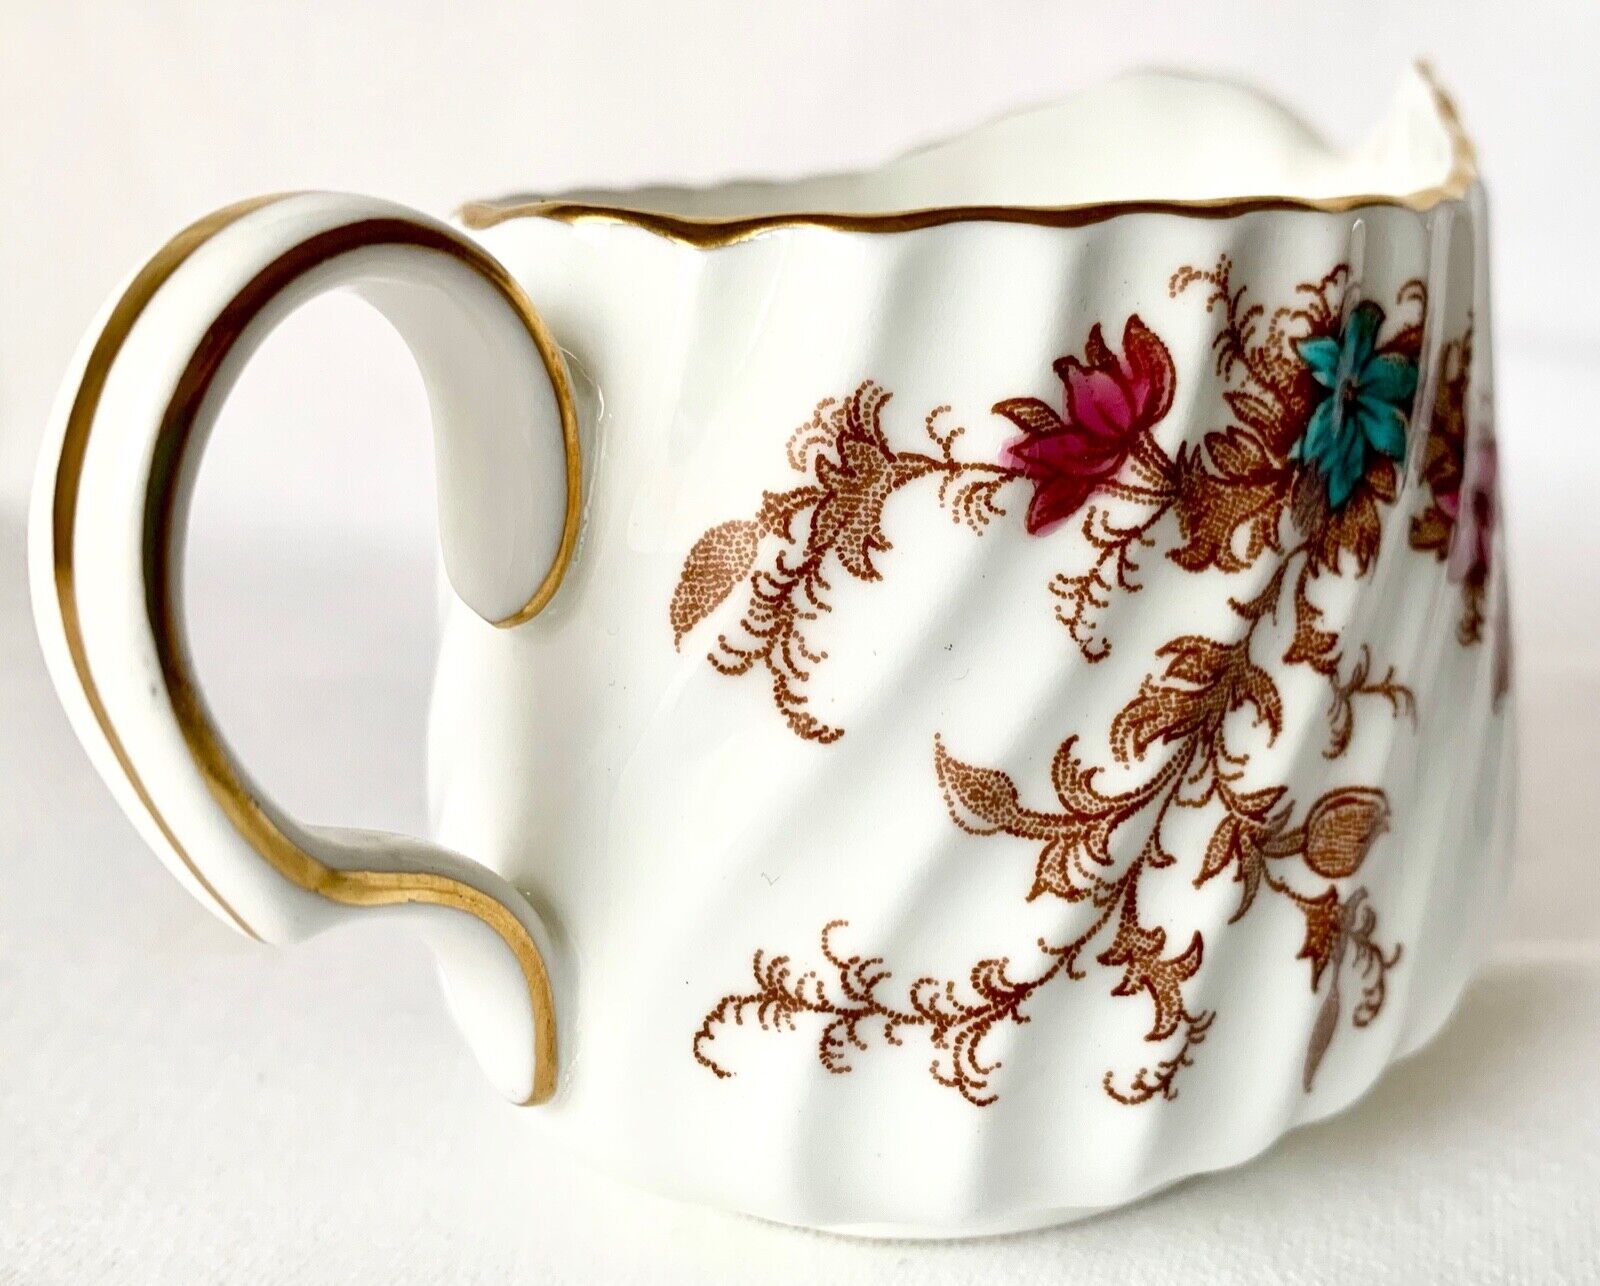 LOVELY MINTON ANCESTRAL SMALL CREAMER; GOLD TRIM, S376, EXCELLENT CONDITION